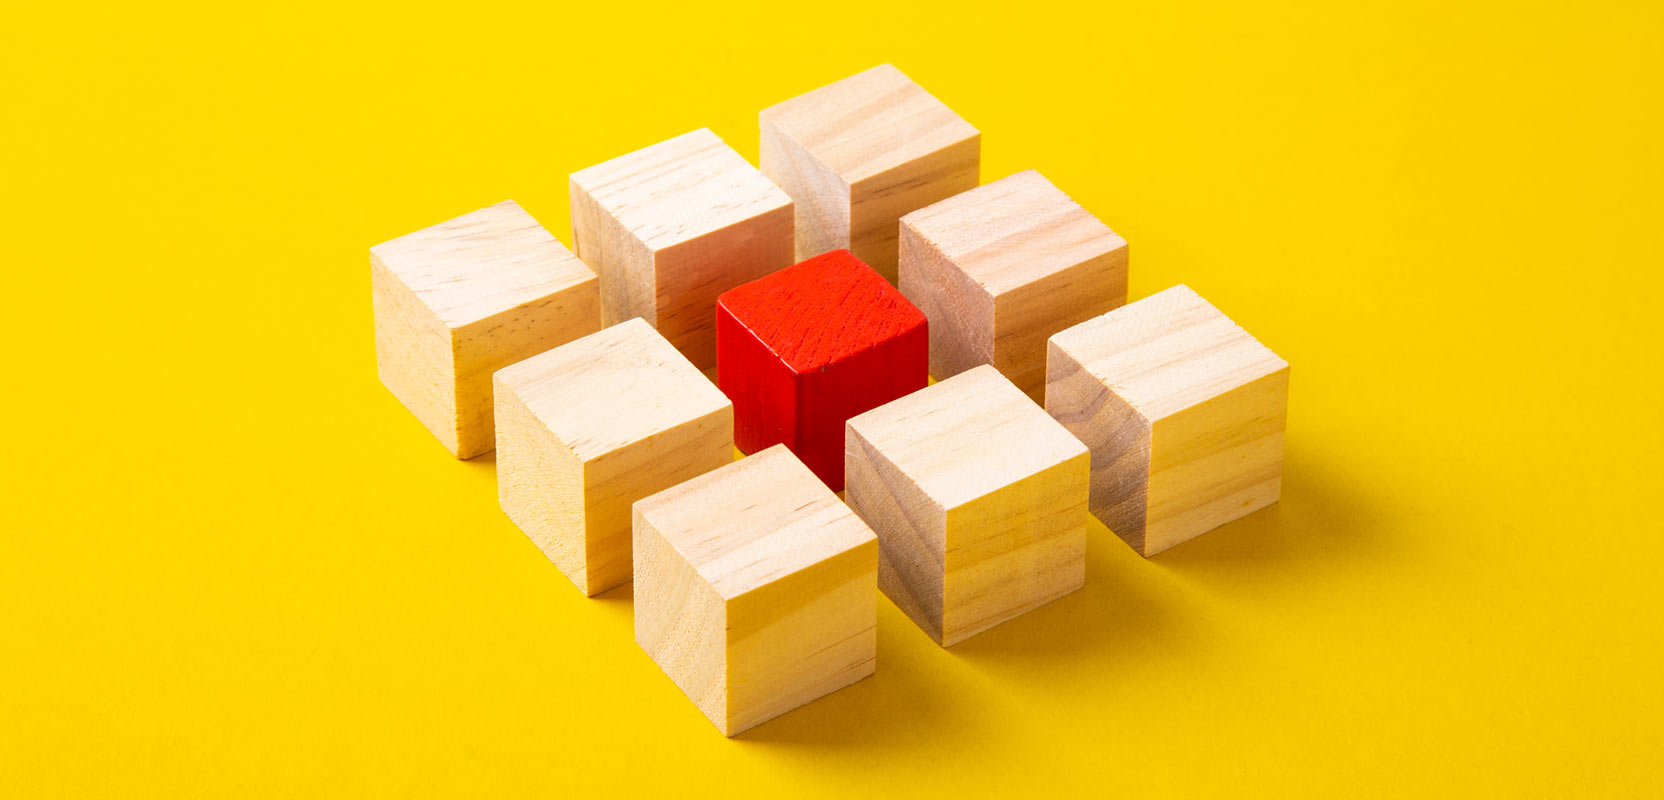 Square of nine wooden blocks with a red block in the center, symbolizing a profitable niche for a freelance blog